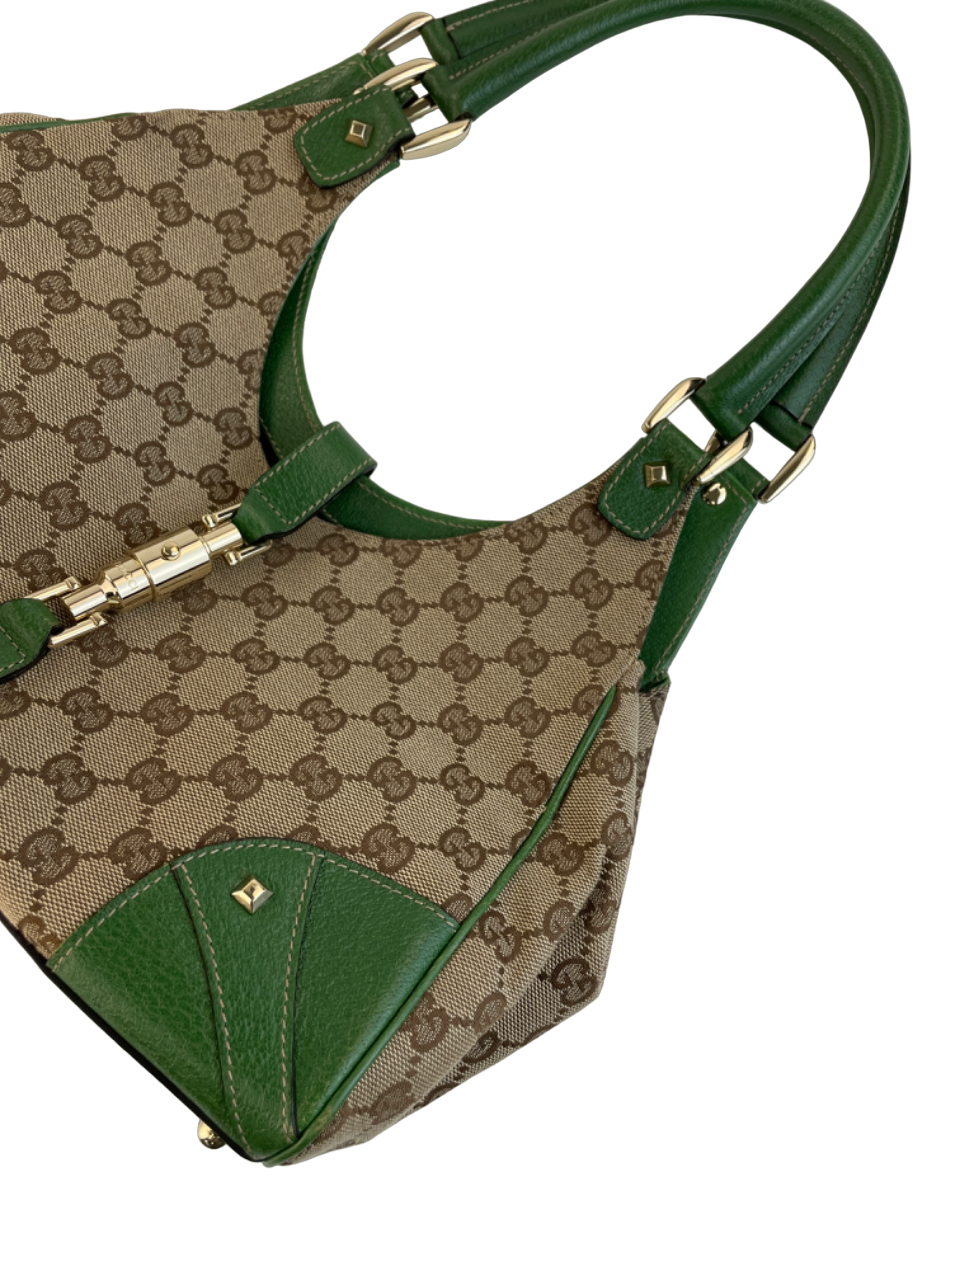 PRELOVED Gucci Green Leather and GG Canvas Jackie Shoulder Hobo